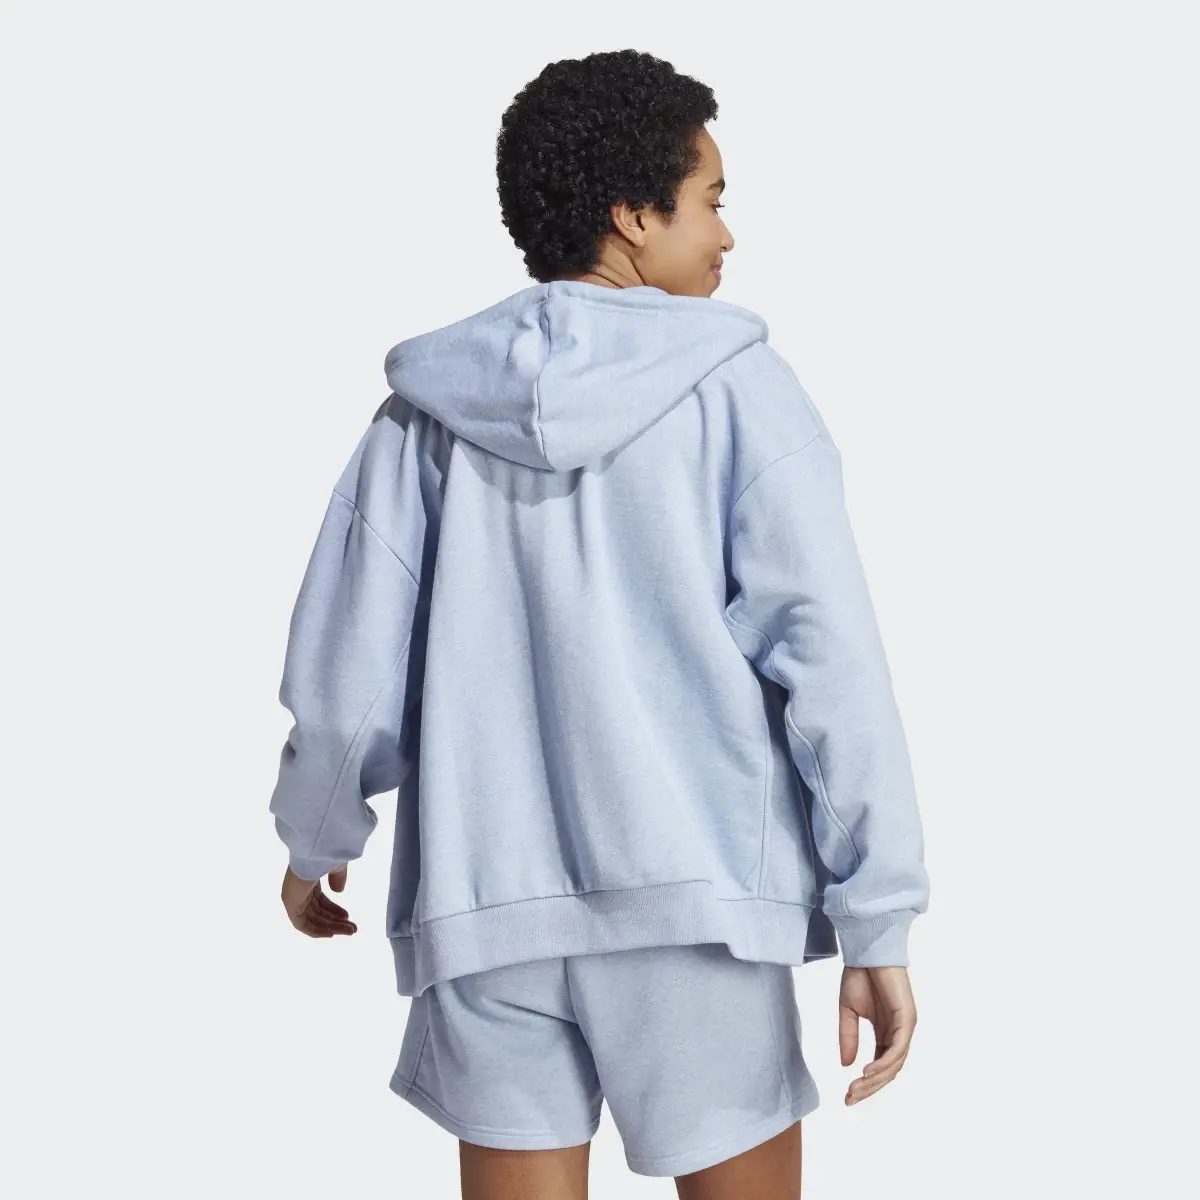 Adidas All SZN French Terry Oversized Full-Zip Hoodie. 3